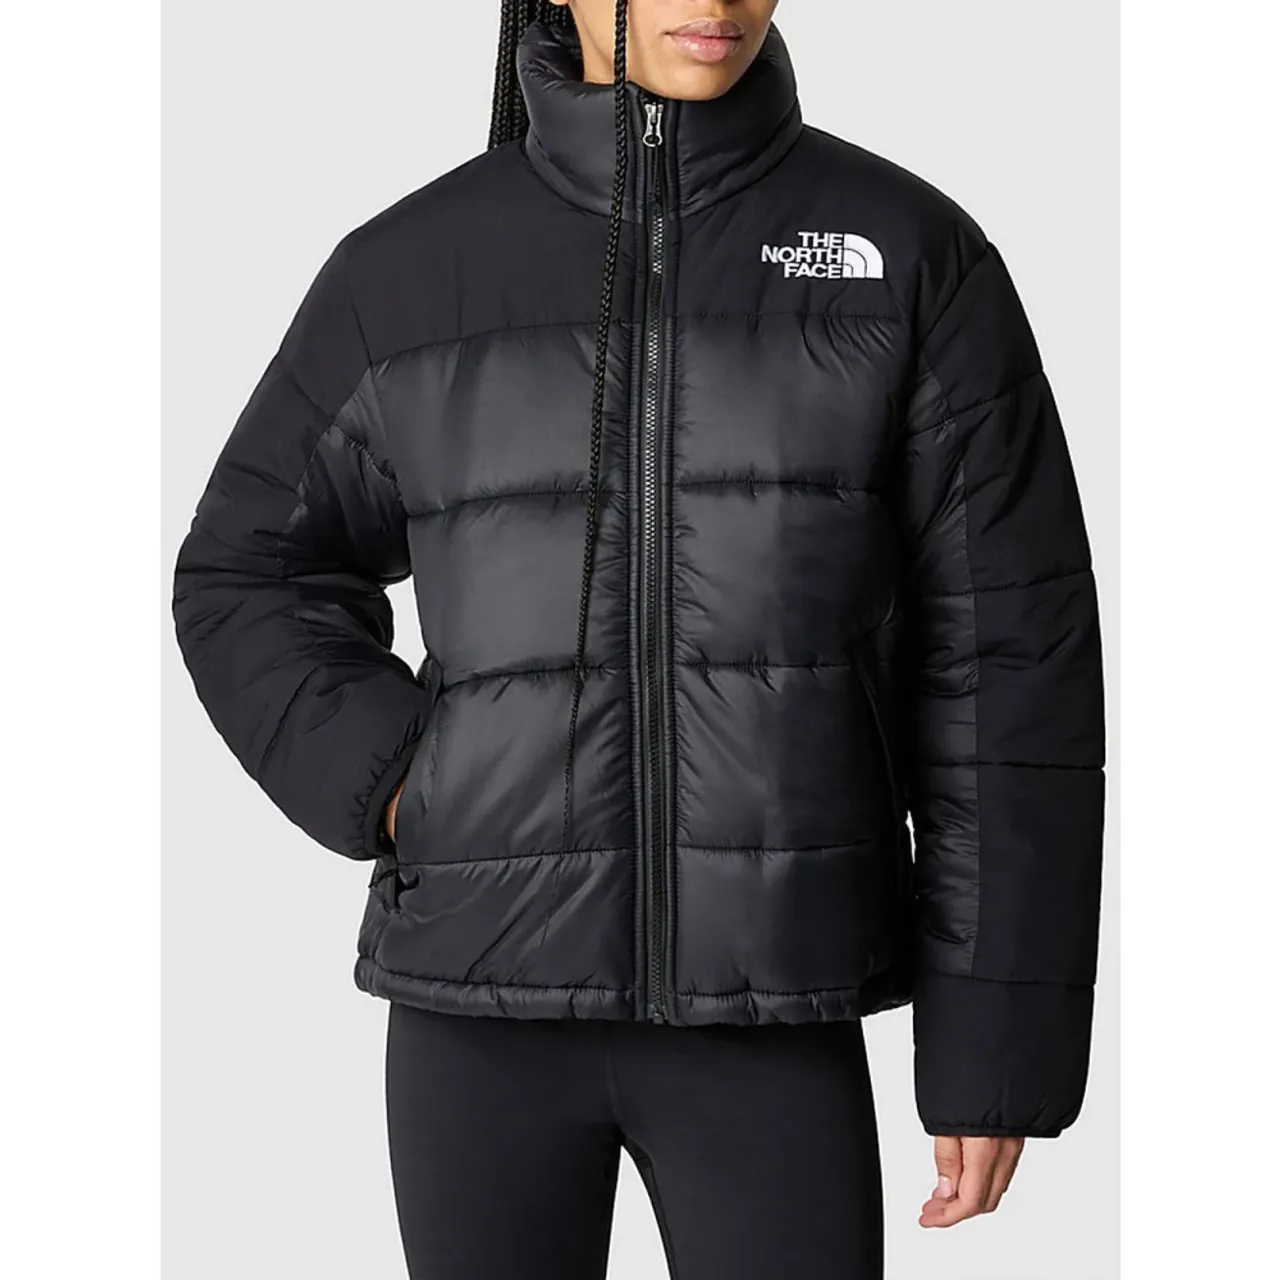 The North Face , Hmlyn Insulated Jacket ,Black female, Sizes: